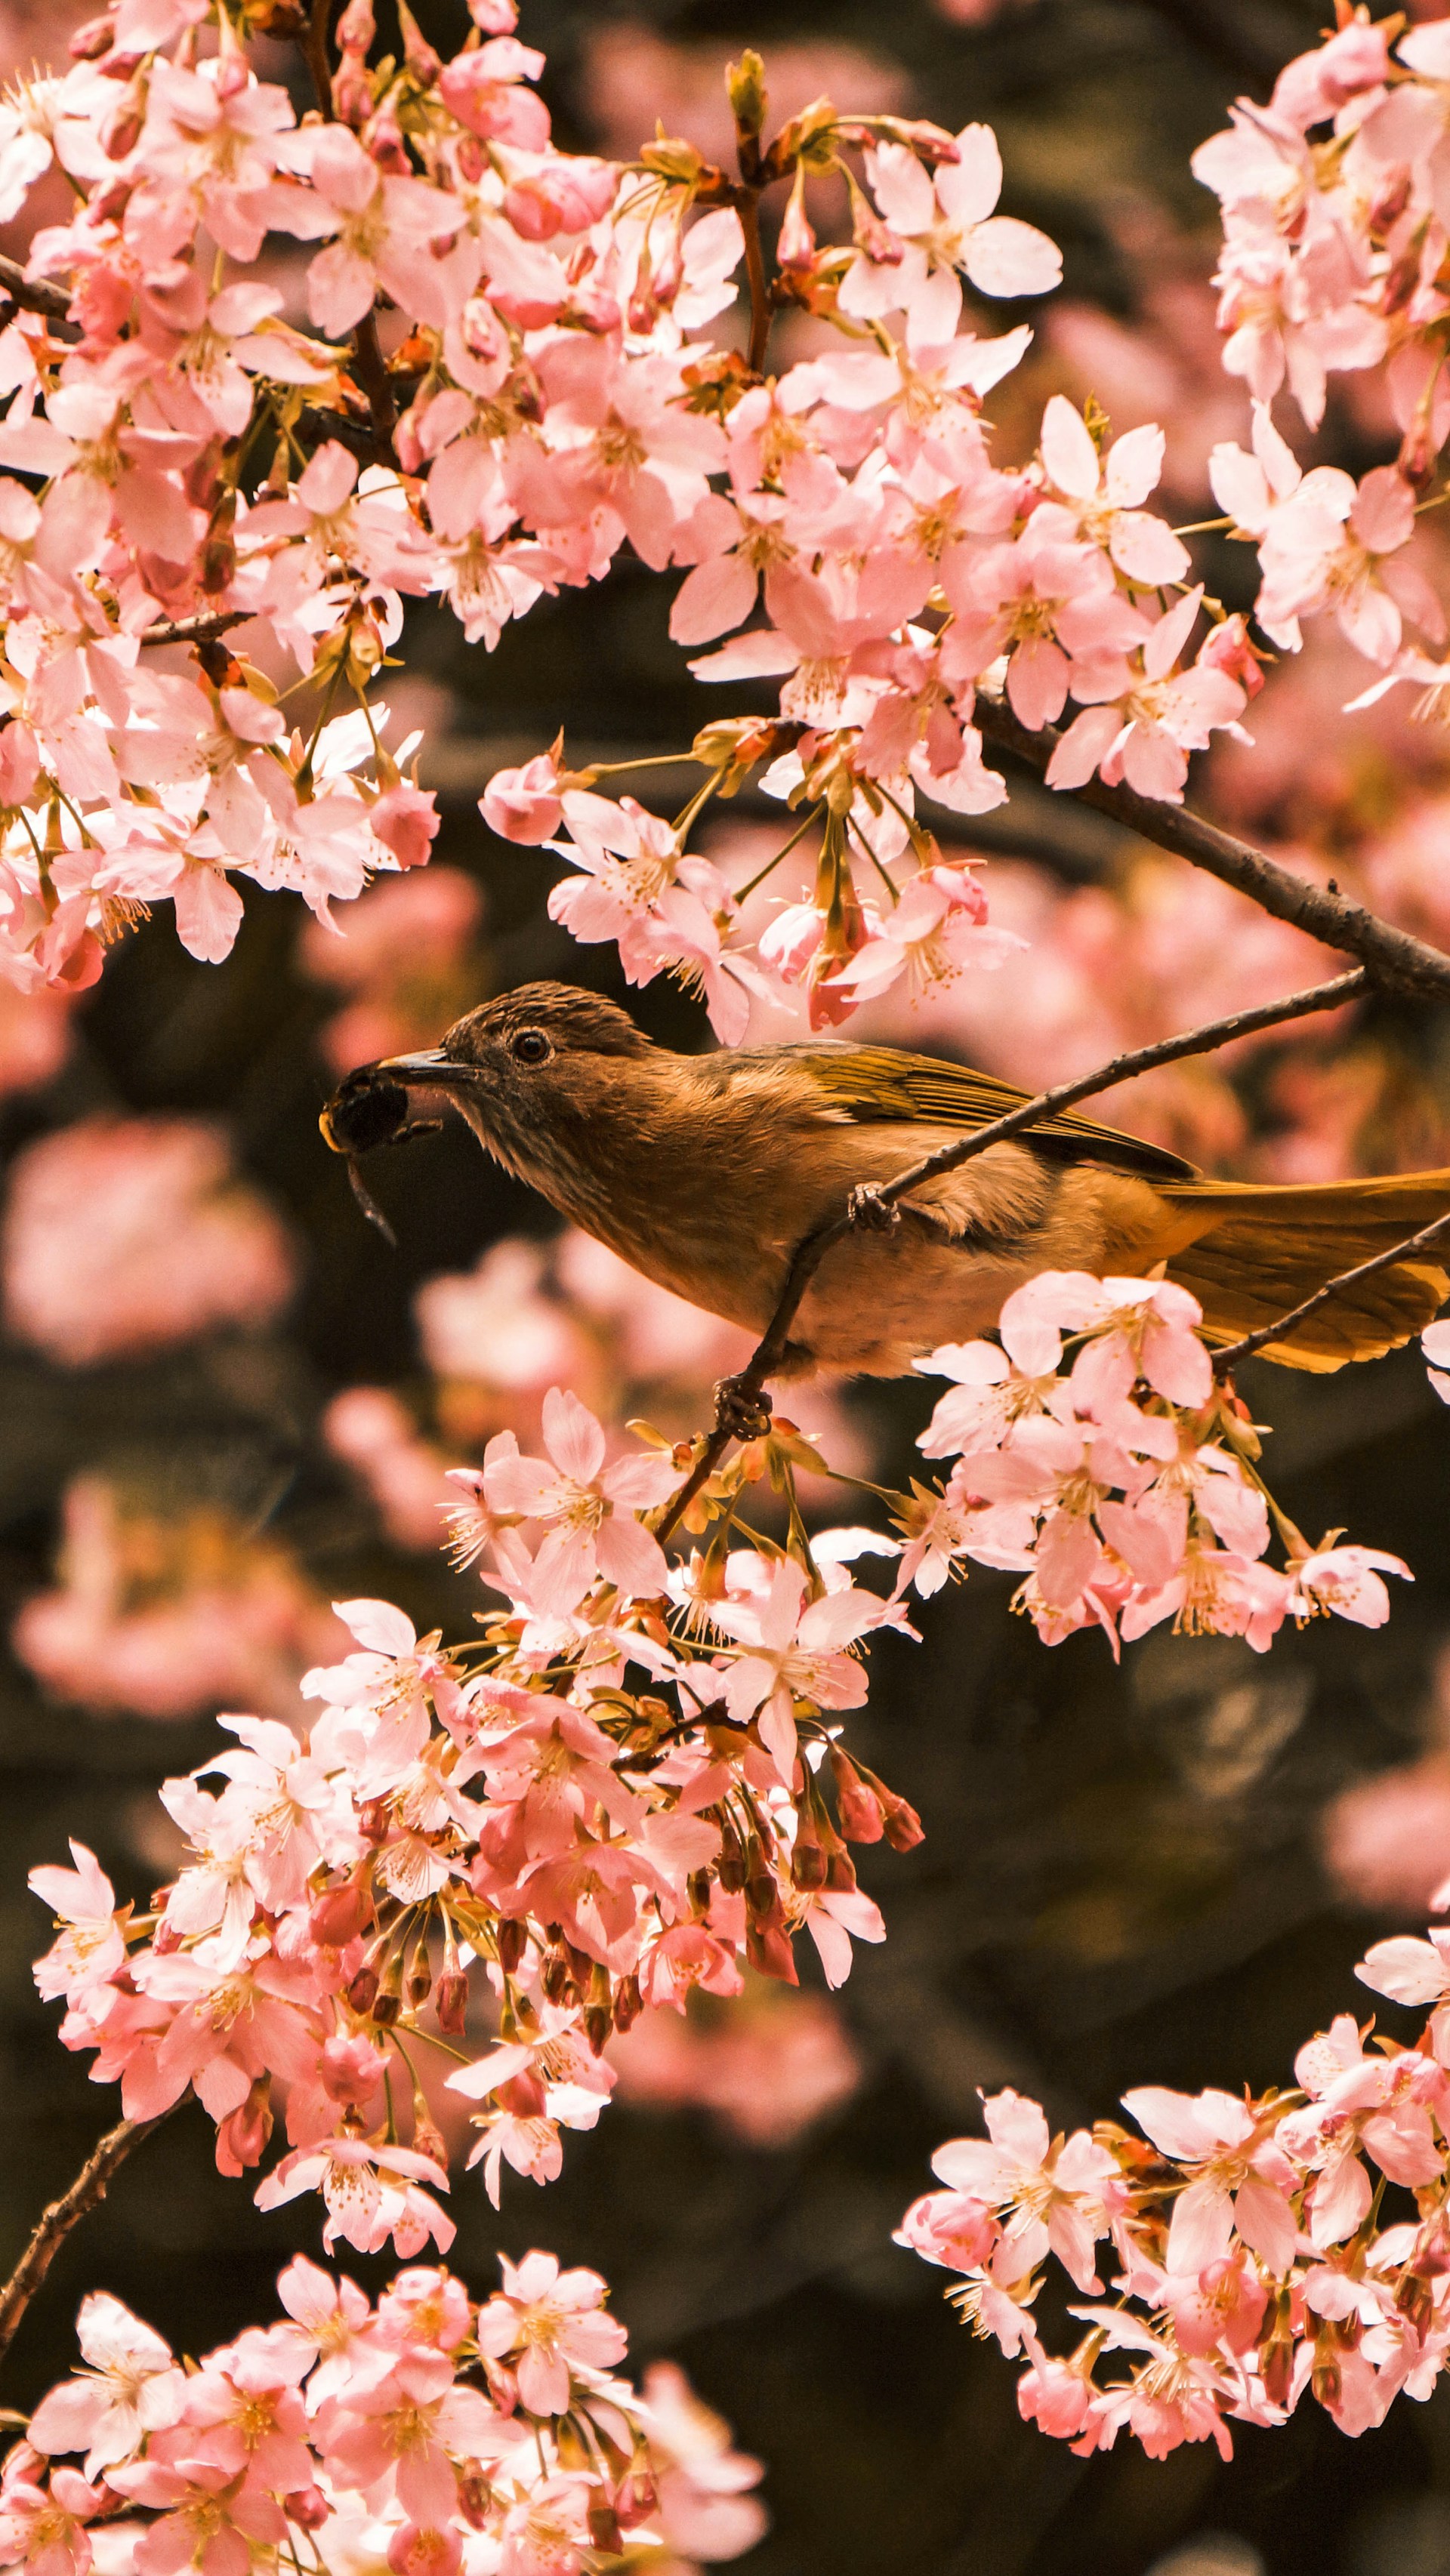 Birds and Flowers Wallpapers Free Download 1920x3412